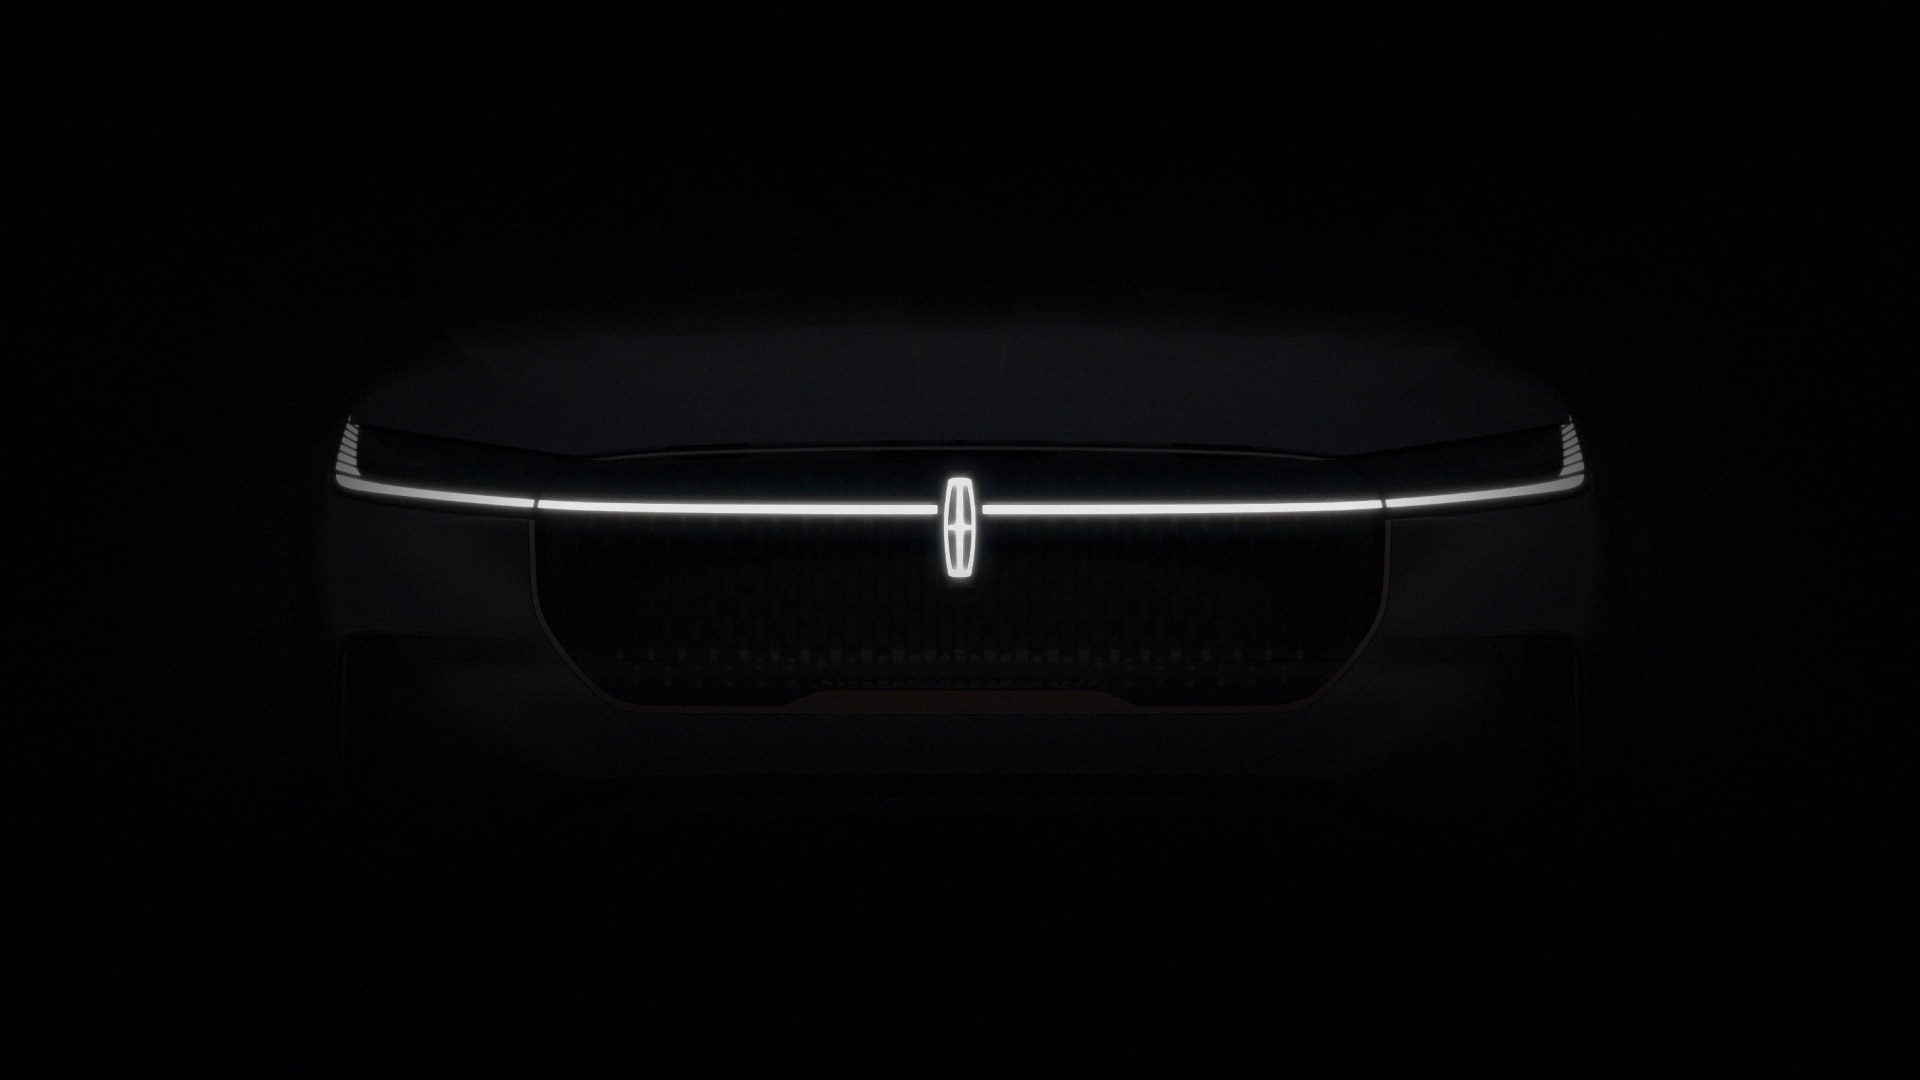 LINCOLN ACCELERATES BRAND TRANSFORMATION; PLANS TO DELIVER A FULL PORTFOLIO OF CONNECTED AND ELECTRIFIED VEHICLES BY 2030